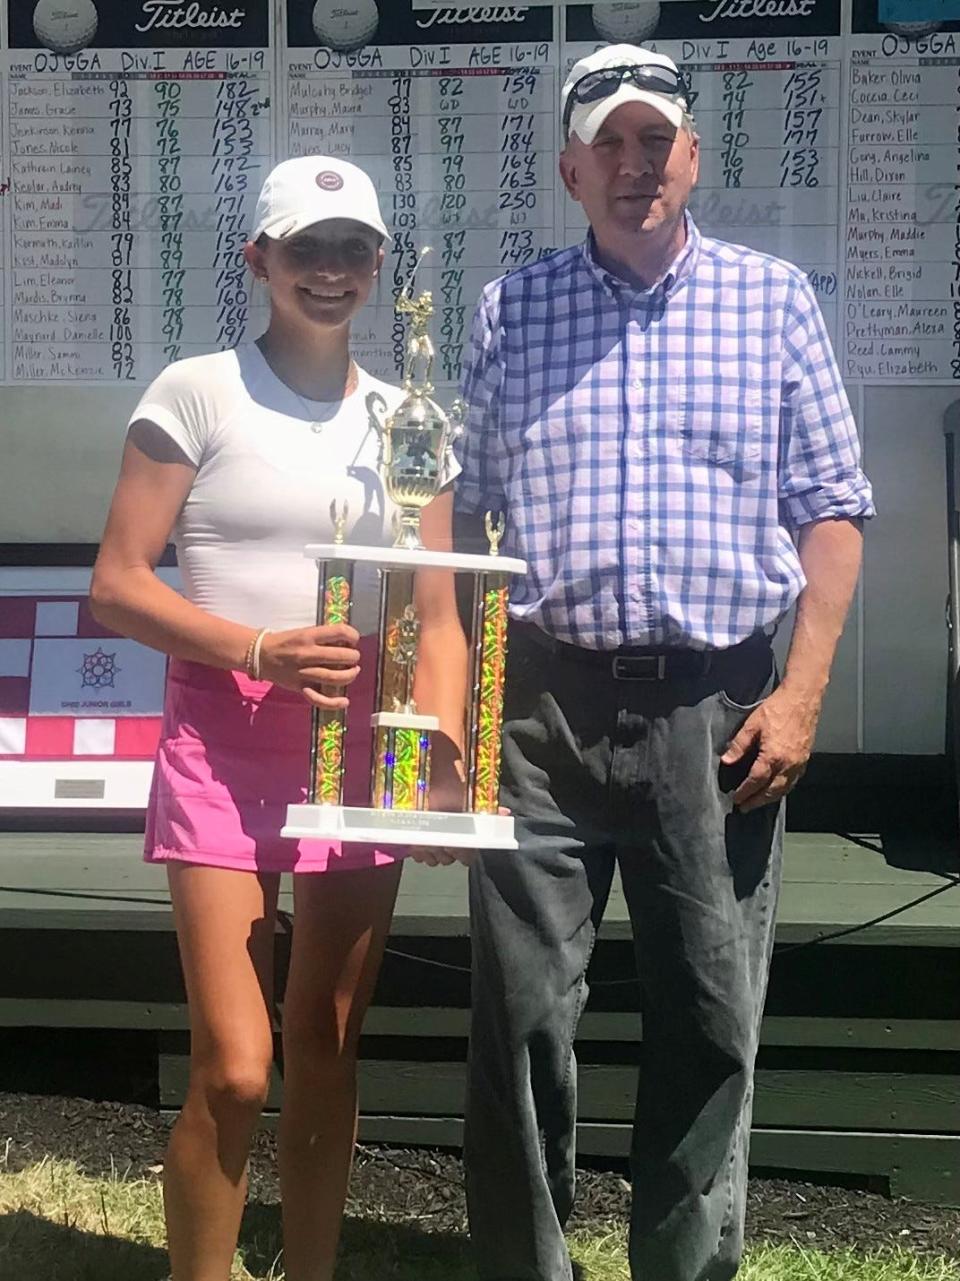 Gary Sims, right, presents Perrysburg's Sydney Deal with her trophy earned at the end of the two-day, 36-hole Ohio Junior Girls Championship completed Tuesday at Marion Country Club.